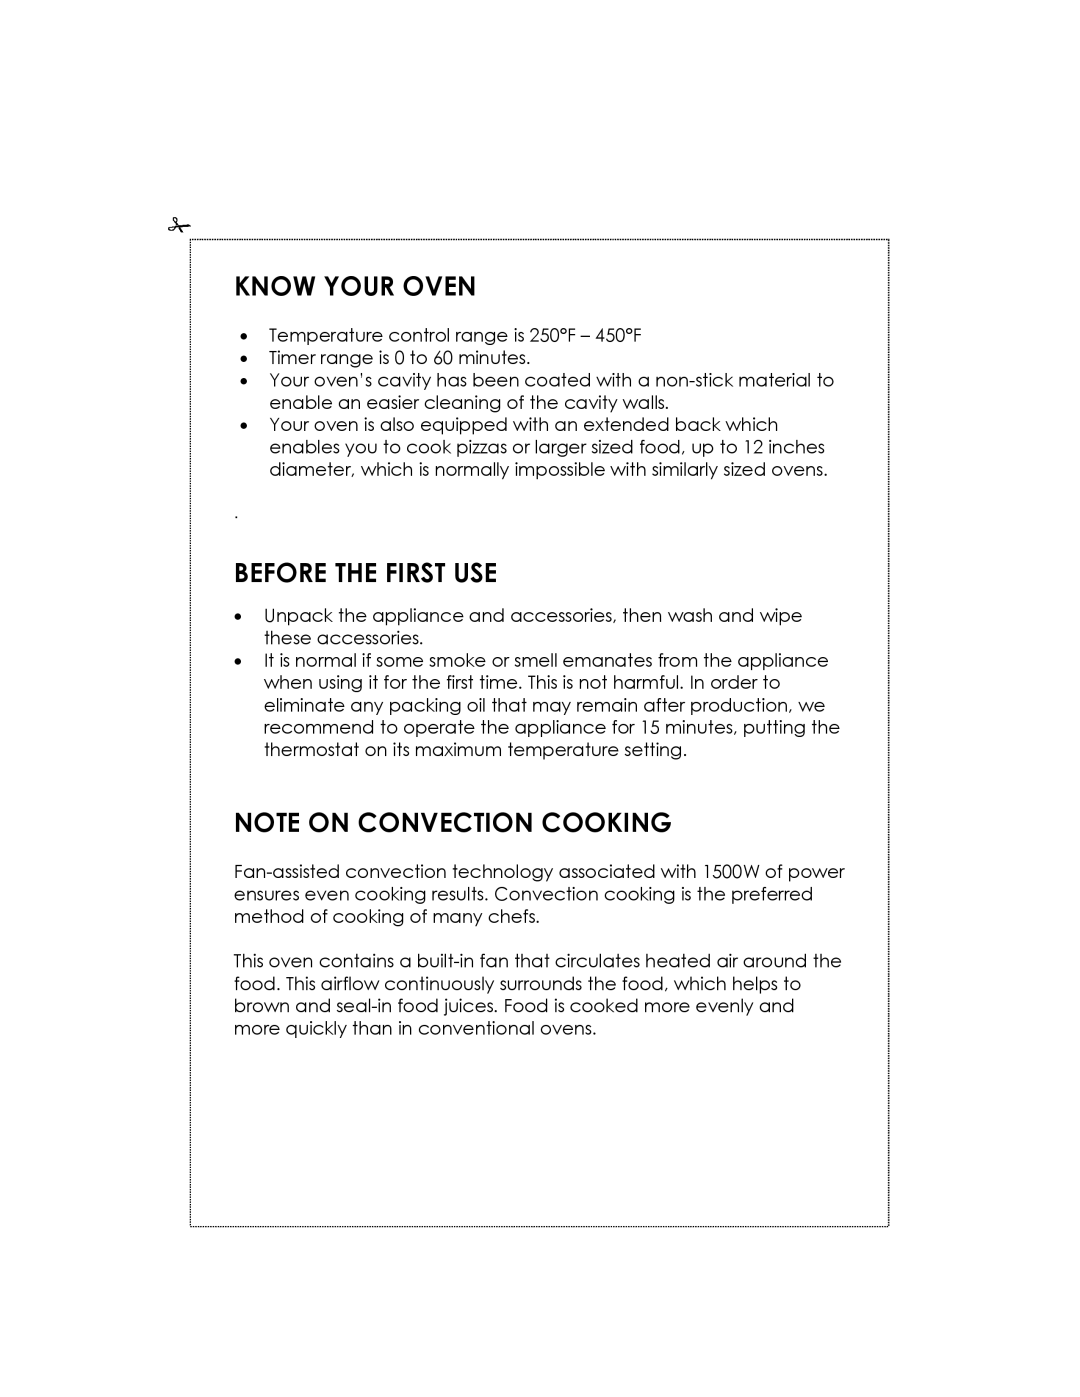 Kalorik USK OV 32091 manual Know Your Oven, Before The First Use, Note On Convection Cooking 